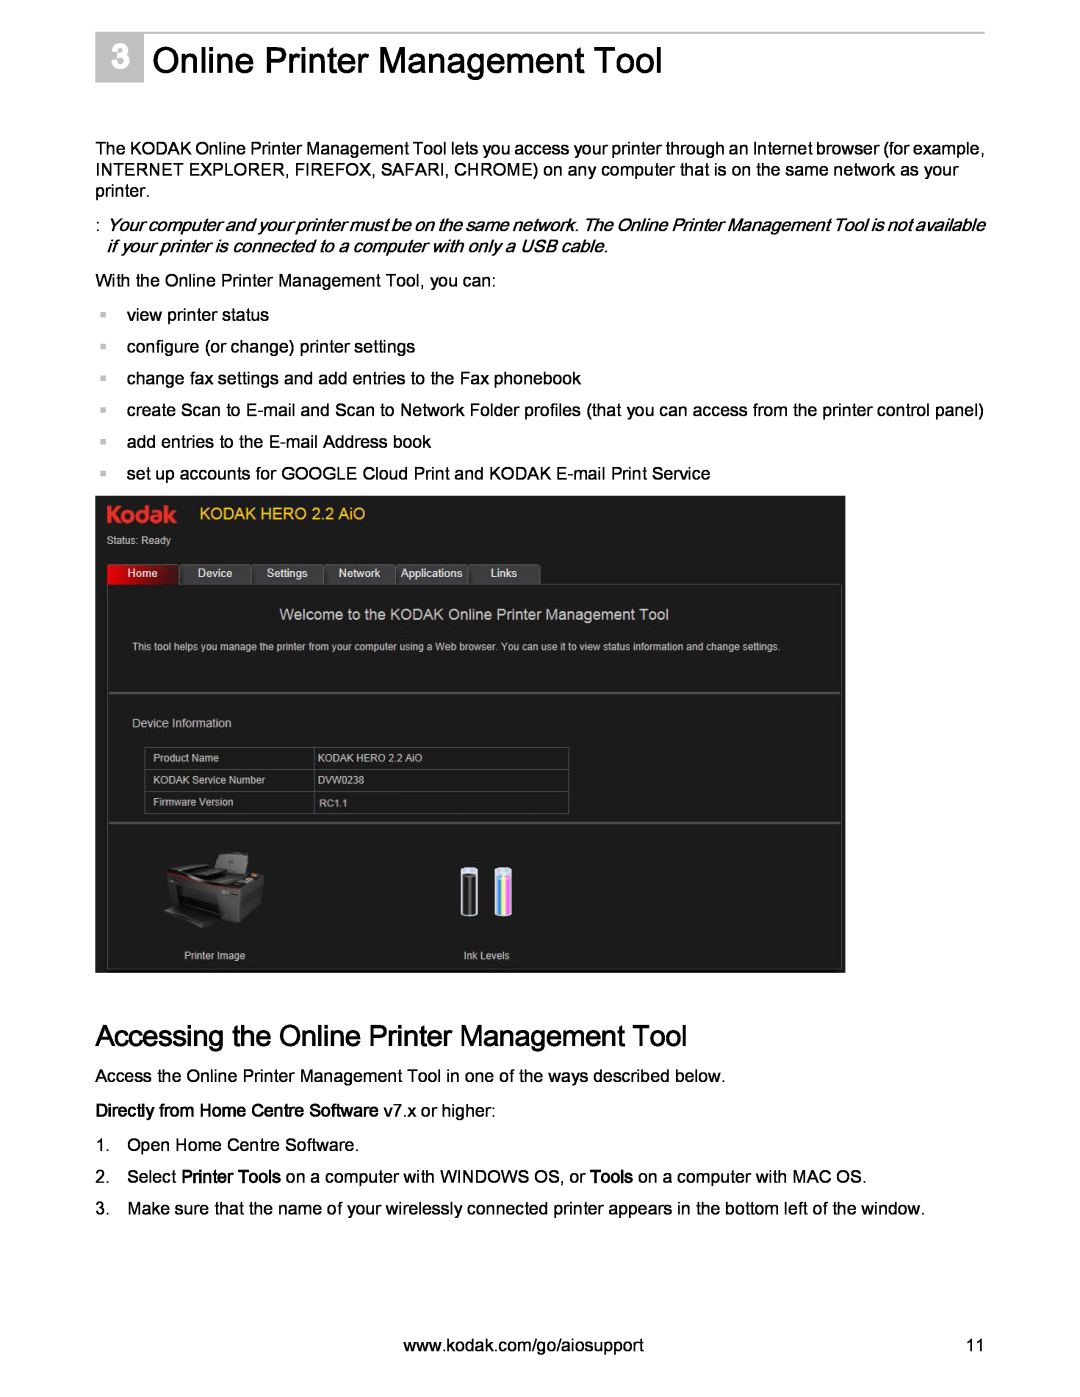 Kodak 2.2 manual Accessing the Online Printer Management Tool, Directly from Home Centre Software v7.x or higher 